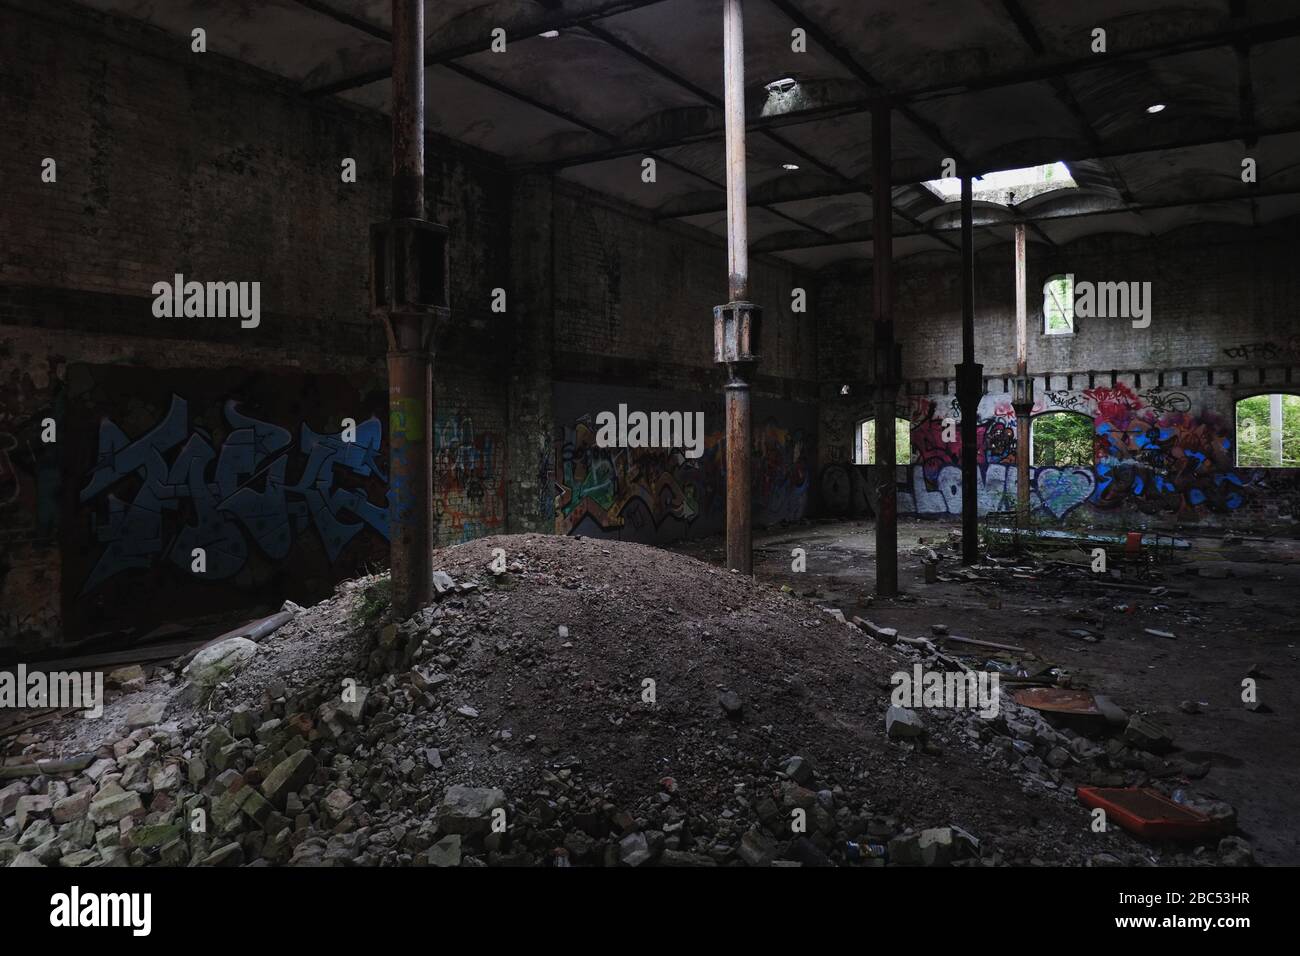 Ground floor interior with cast iron columns, dirt pile, window light & graffiti walls;  The Maltings abandoned industrial site, Mittagong NSW Stock Photo